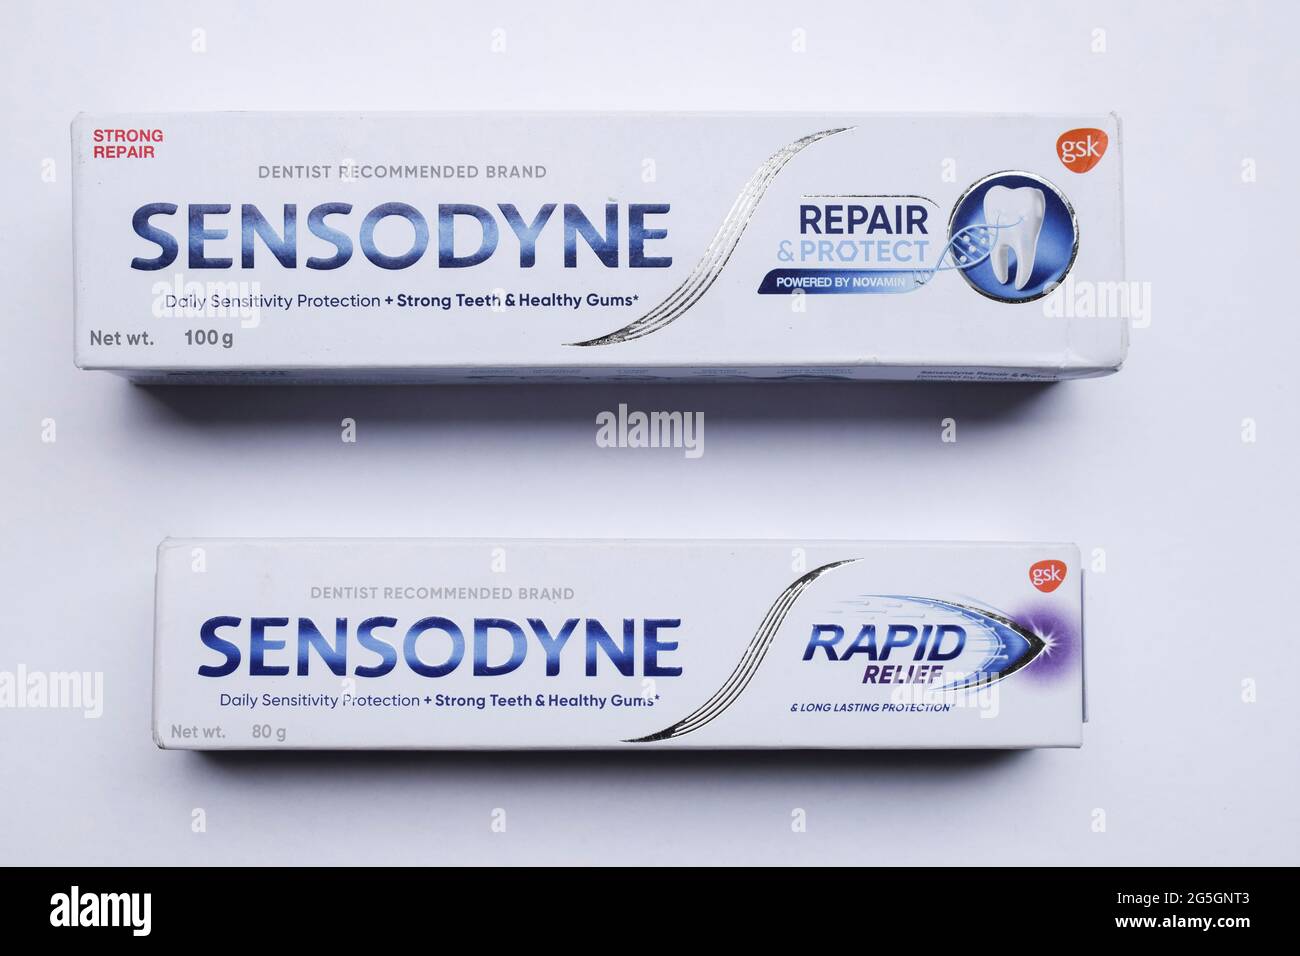 Sensodyne rapid relief tooth paste box isolated on white background. This product is used for white teeth and sensitive gum or cavity pain Stock Photo